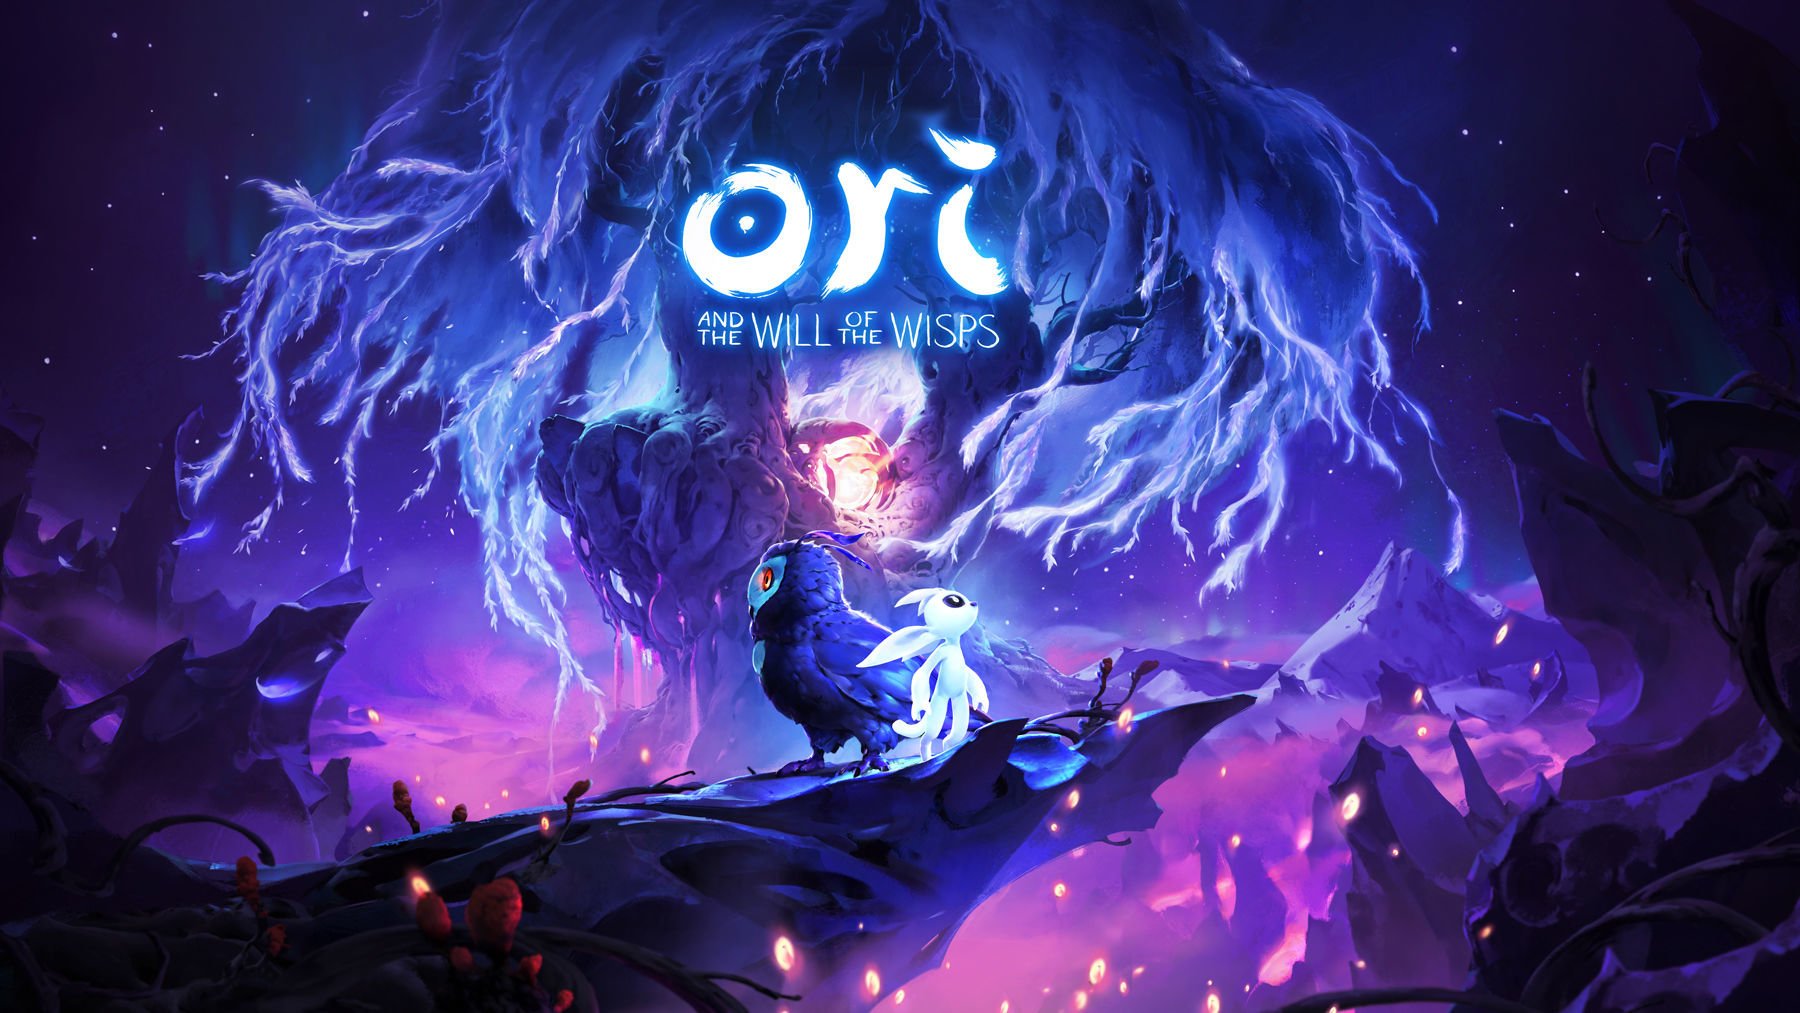 Ori and the will of the wisps na bgs 2019 | dims 2 | sherlock holmes | ori and the will of the wisps sherlock holmes